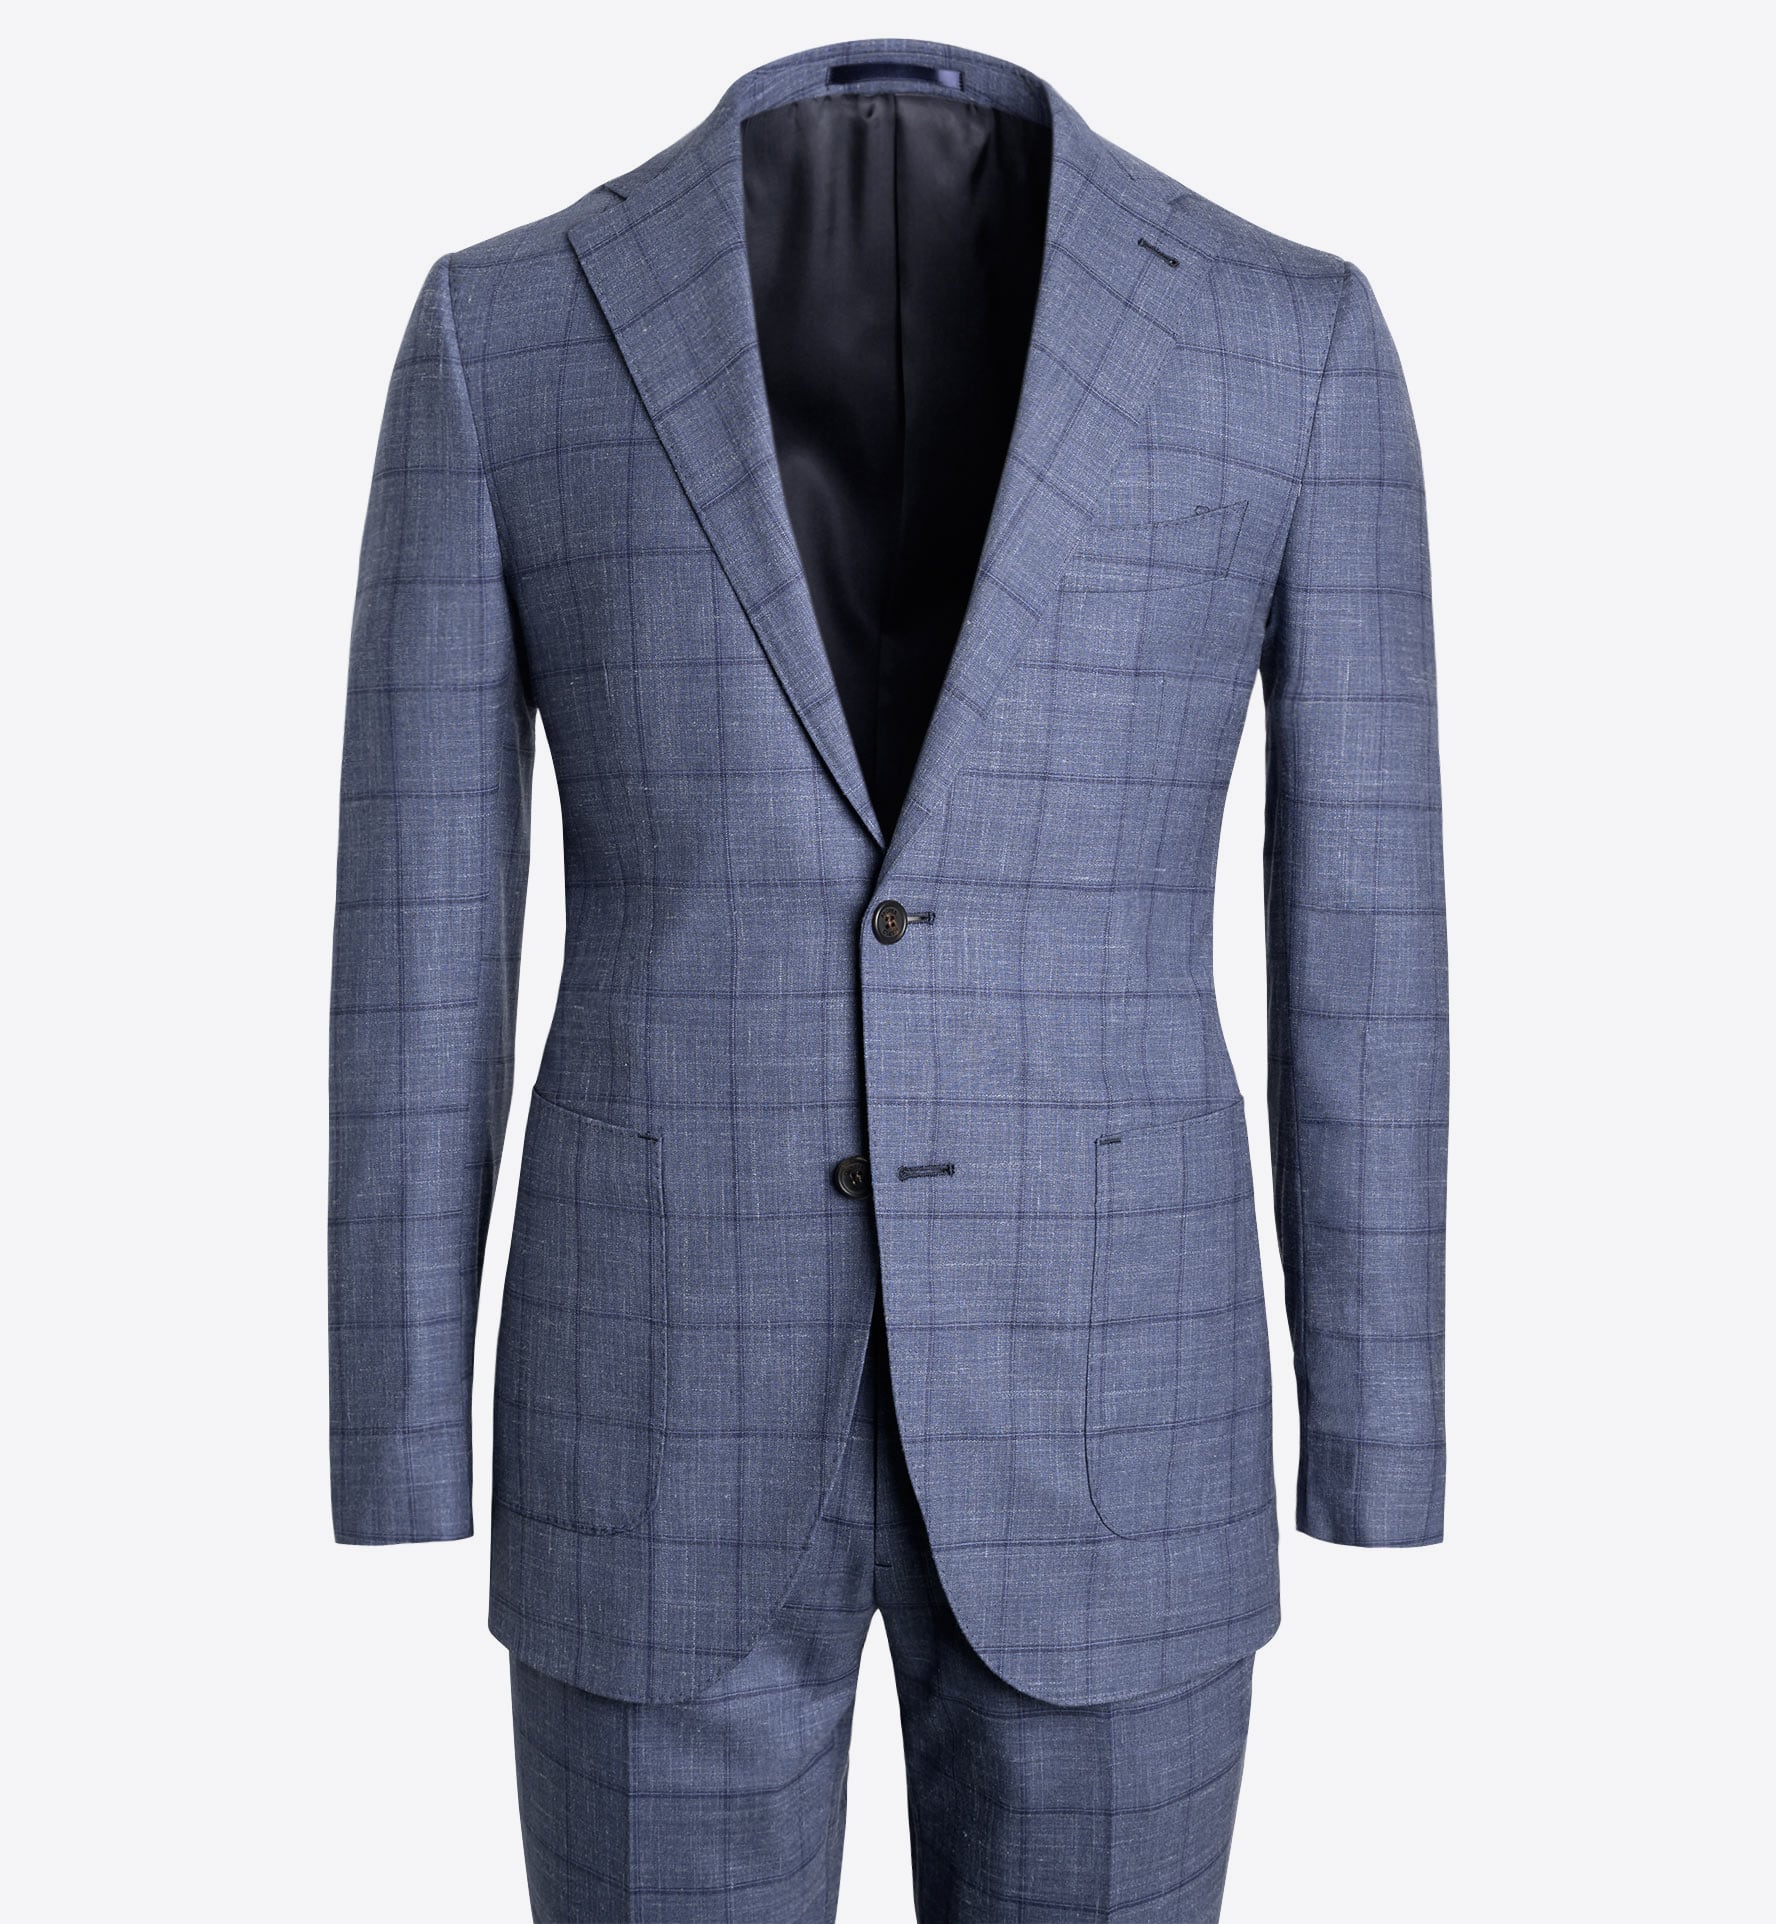 Zoom Image of Bedford Slate Windowpane Stretch Wool Blend Suit